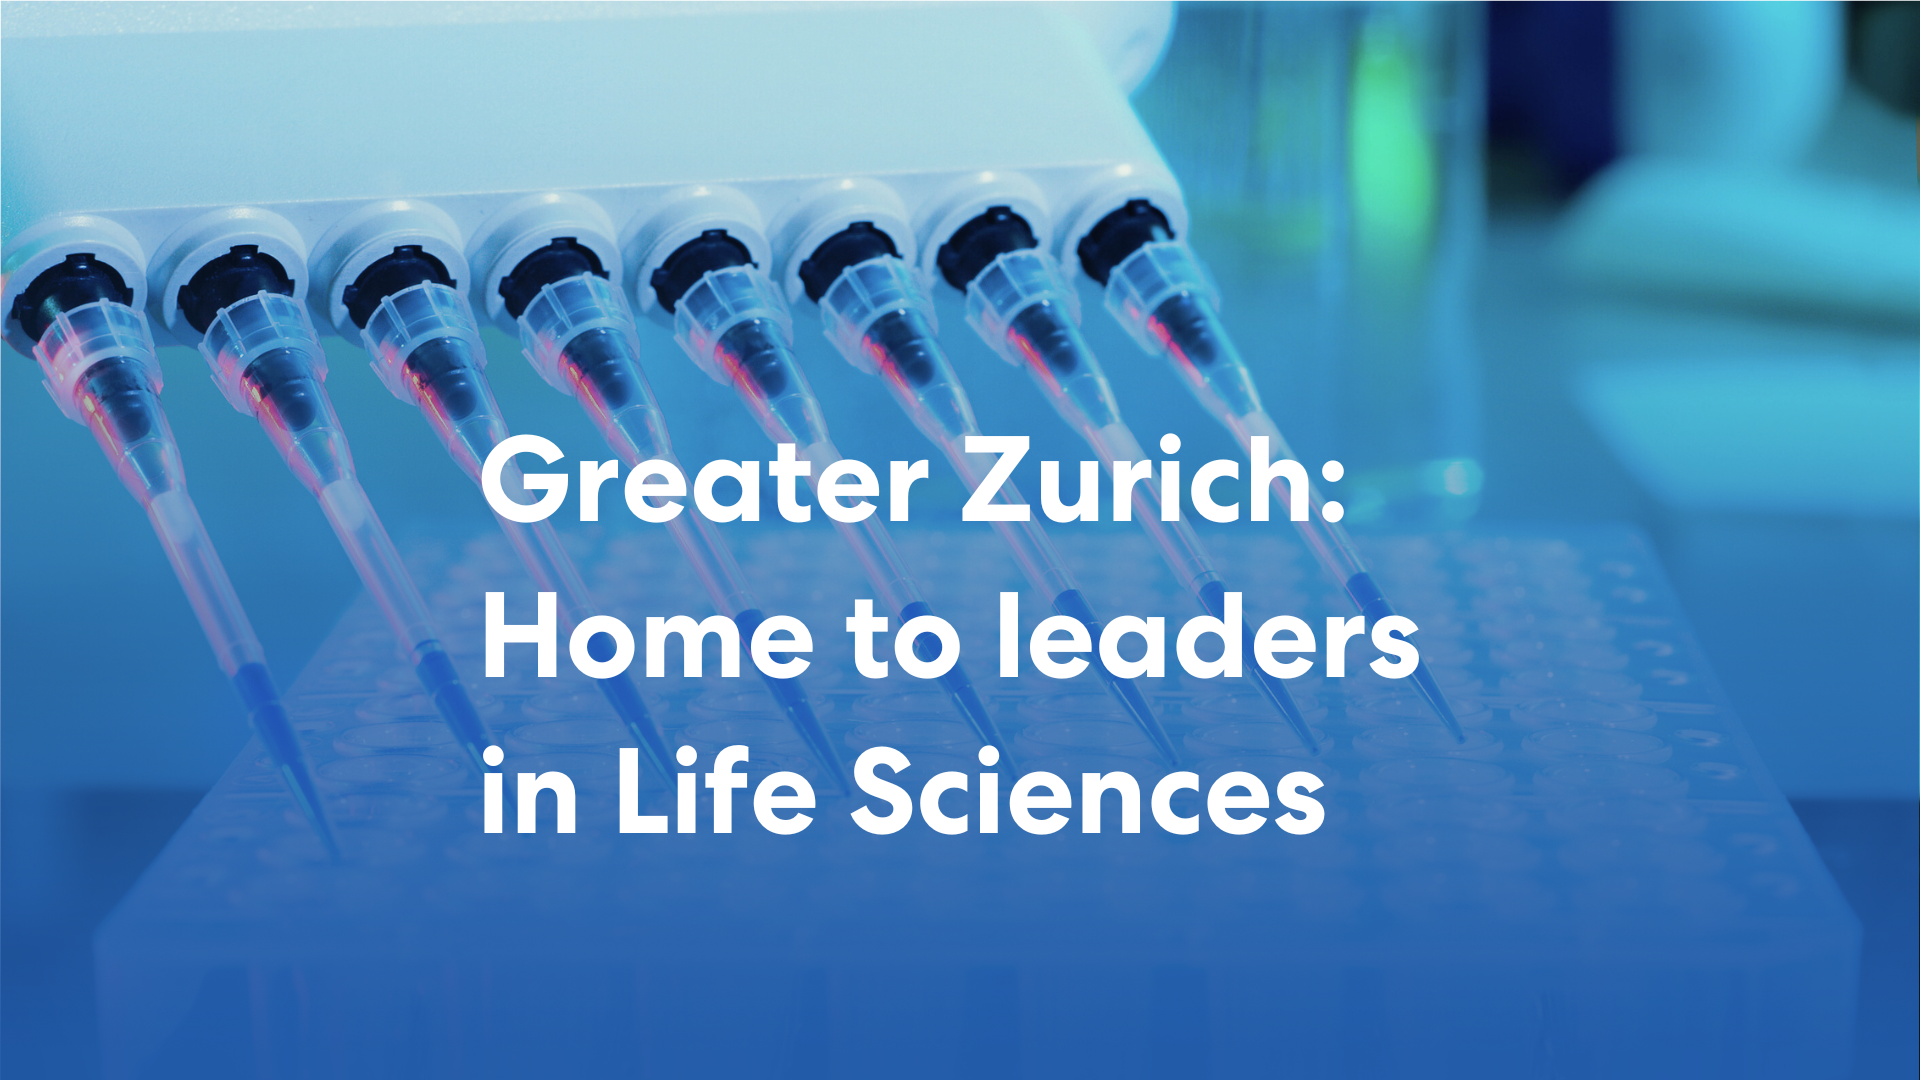 The Greater Zurich Area is a global Life Sciences Hub with leading and innovative companies and research.